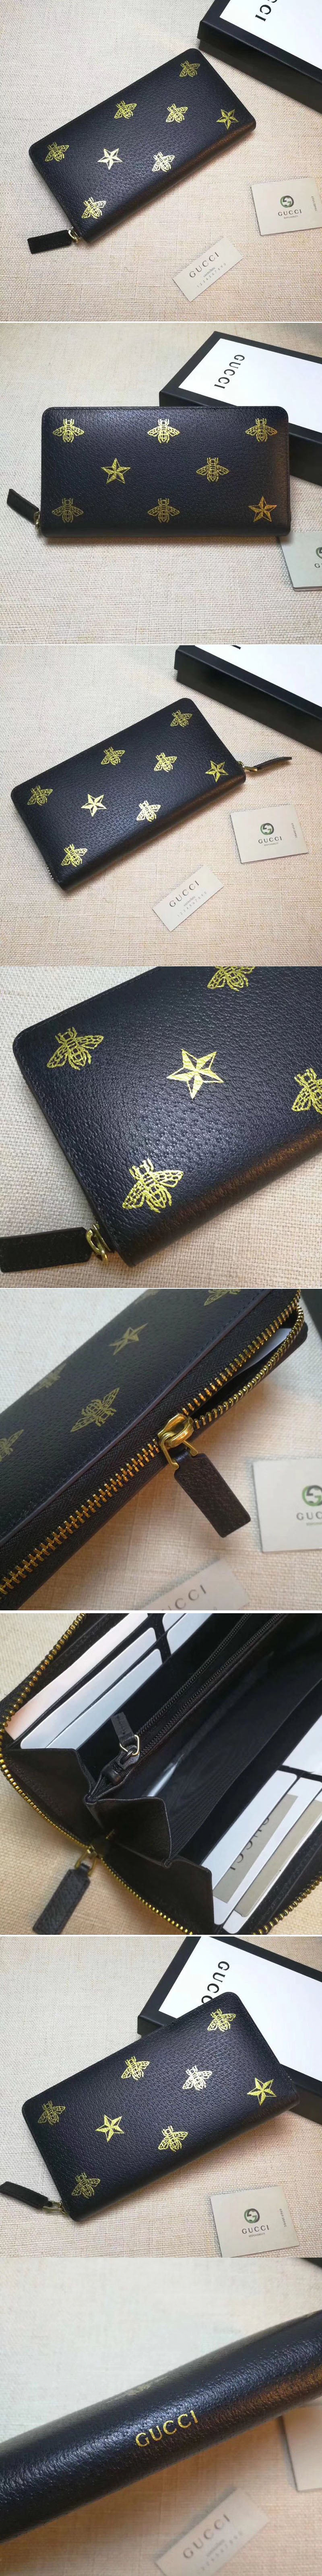 Replica Gucci 495062 Bee Star leather zip around wallet